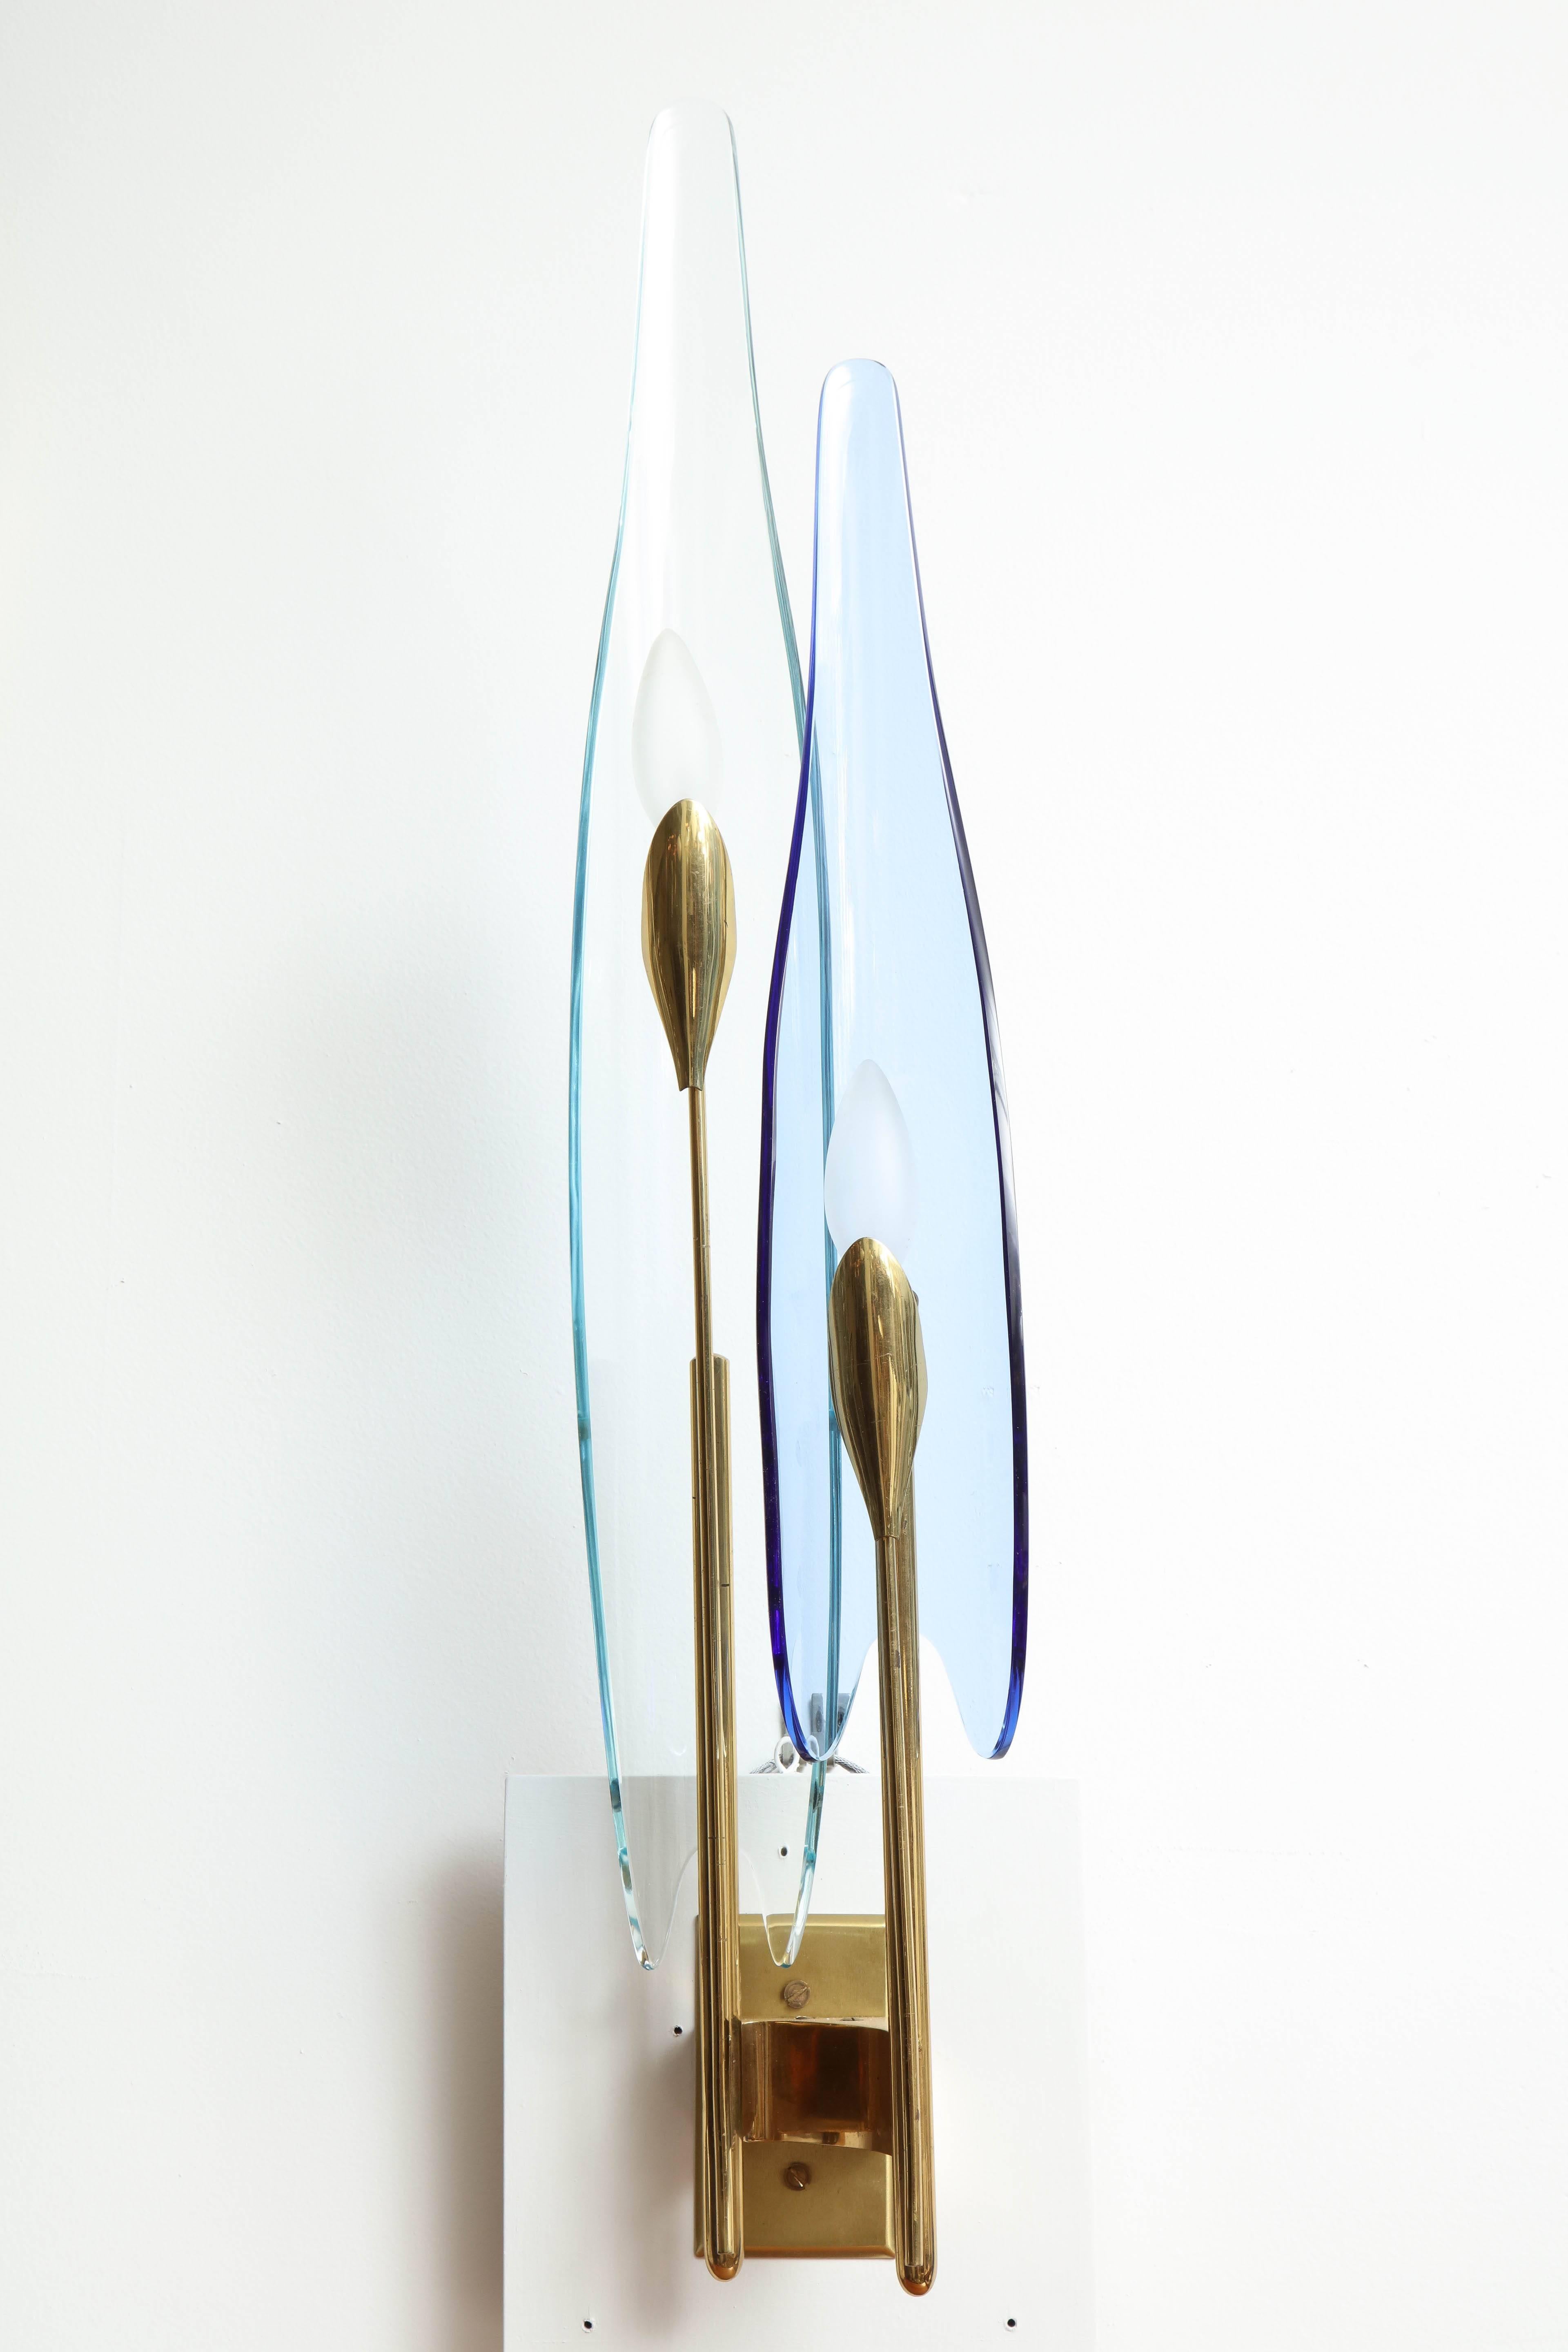 Pair of two-light Dahlia sconces by Max Ingrand for Fontana Arte. Fontana Arte model number 1461. Two-light sconces with elongated elements resembling floral petals, in blue and clear glass. Polished brass structures and newly made back plates for